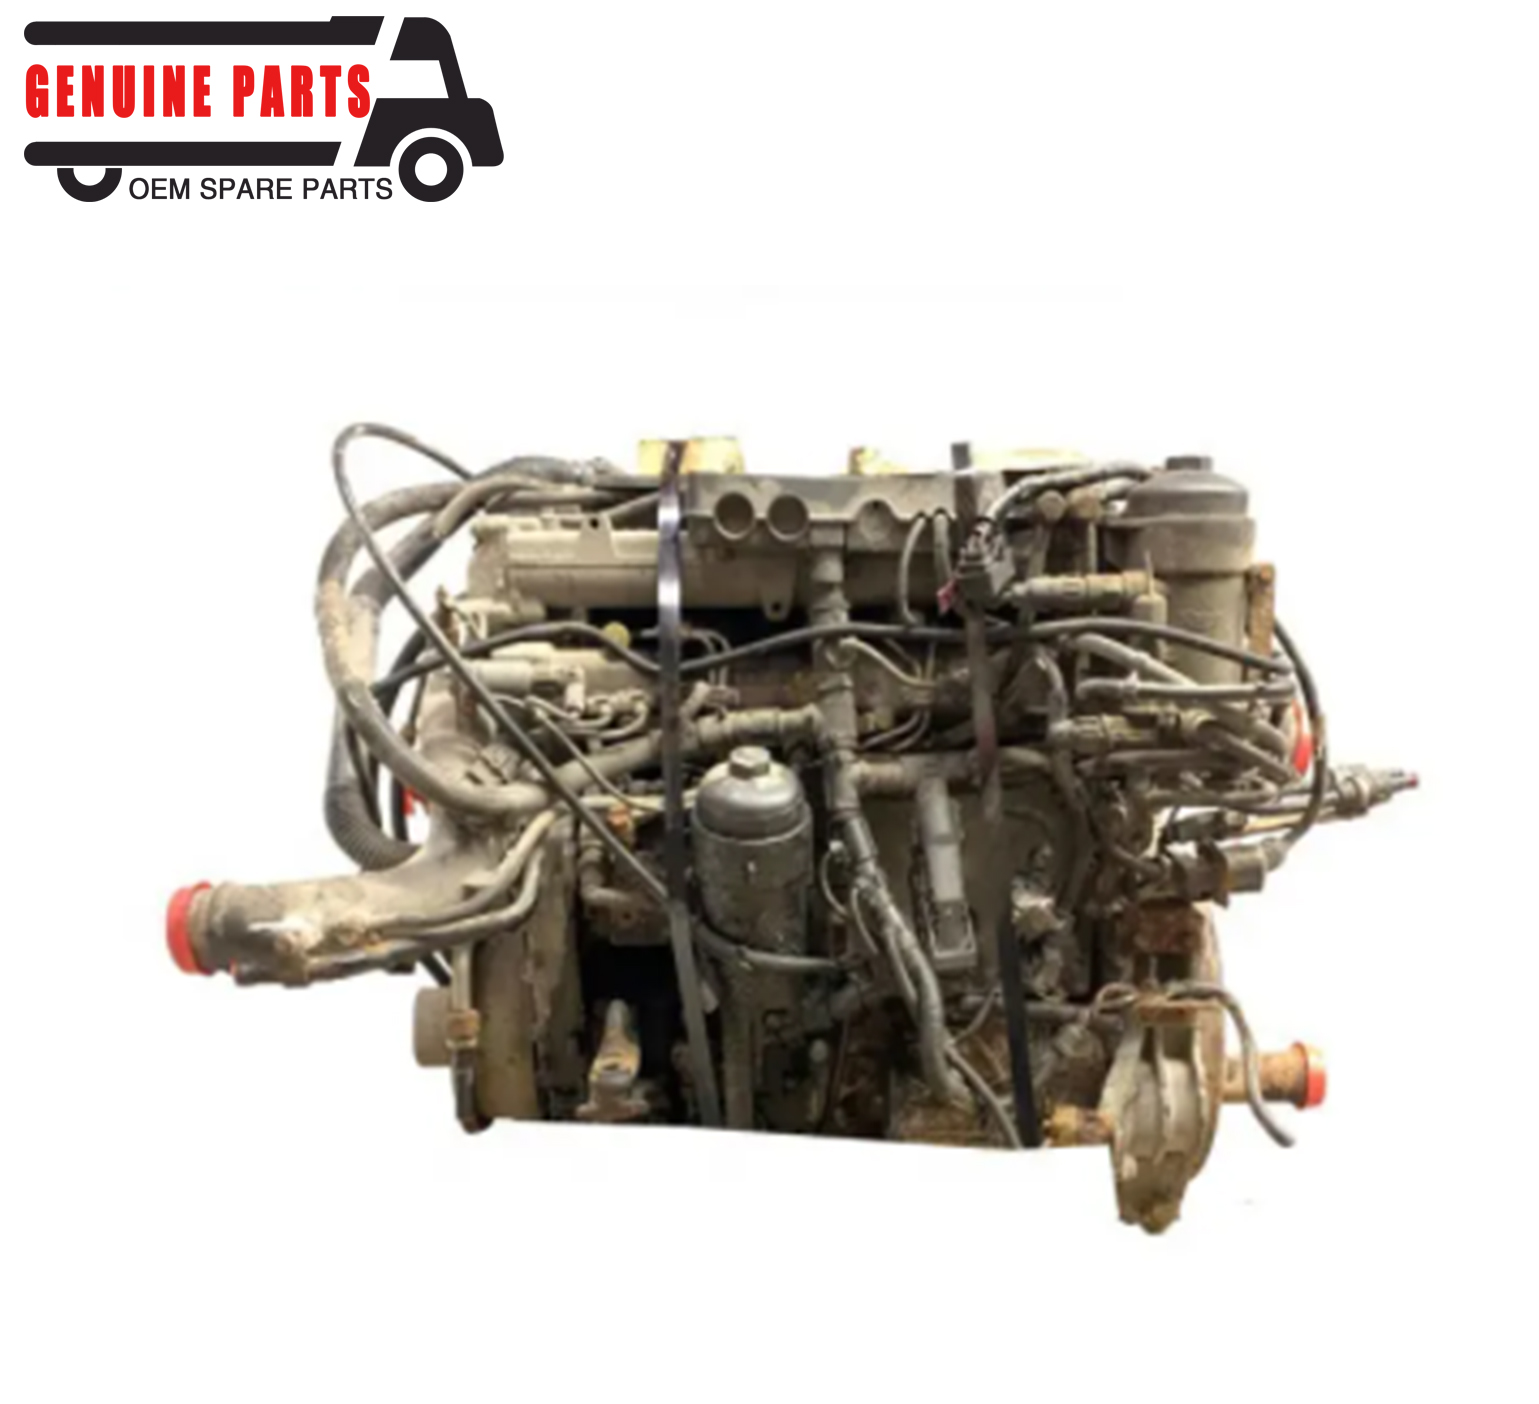 Good condition used Engine Assembly for MAN TGL TGM TGS TGX Truck Used Diesel Engine